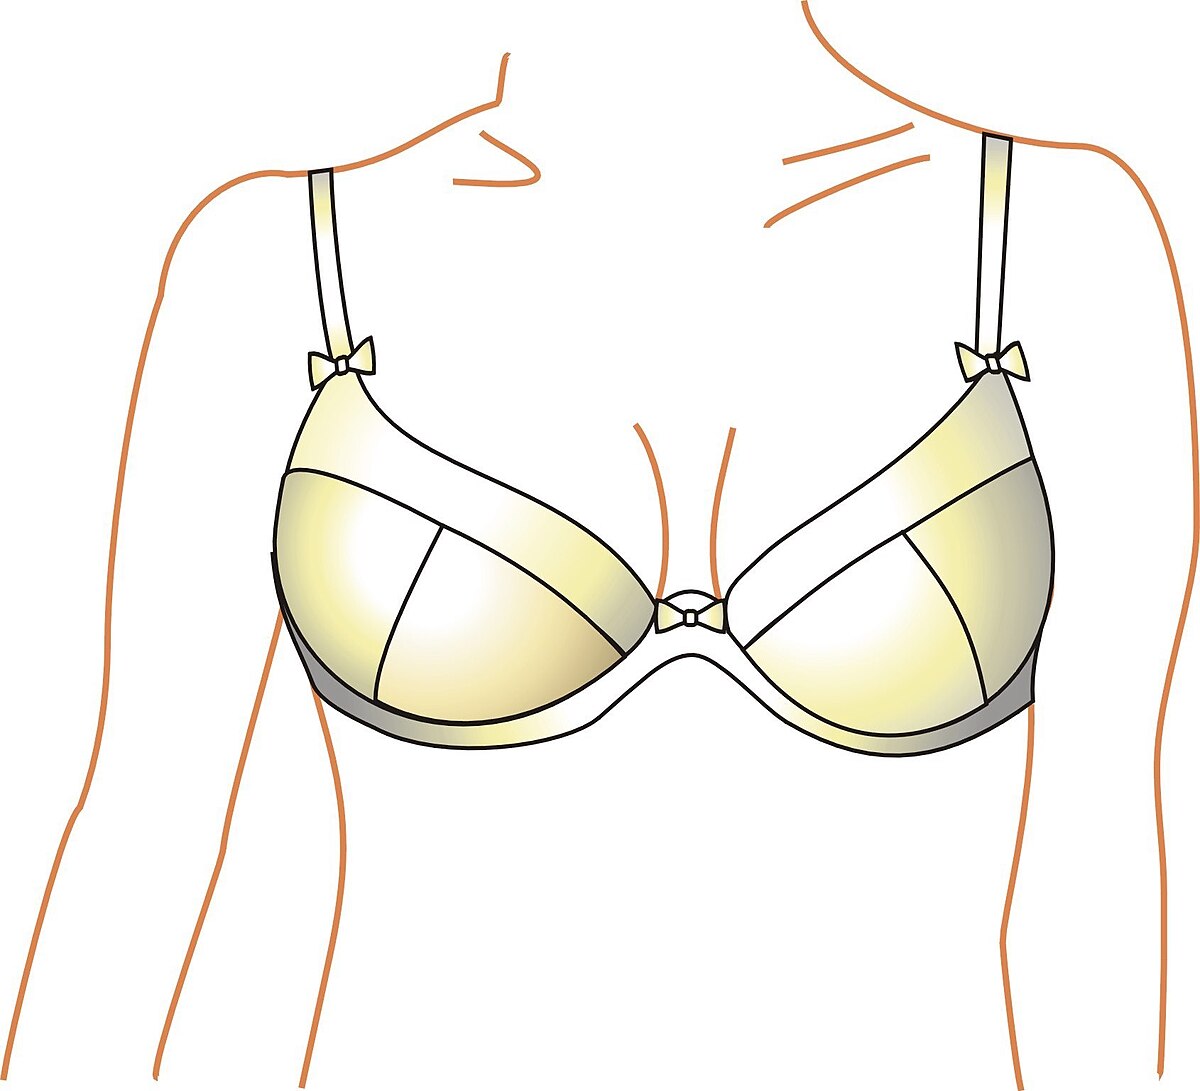 brassiere - Wiktionary, the free dictionary